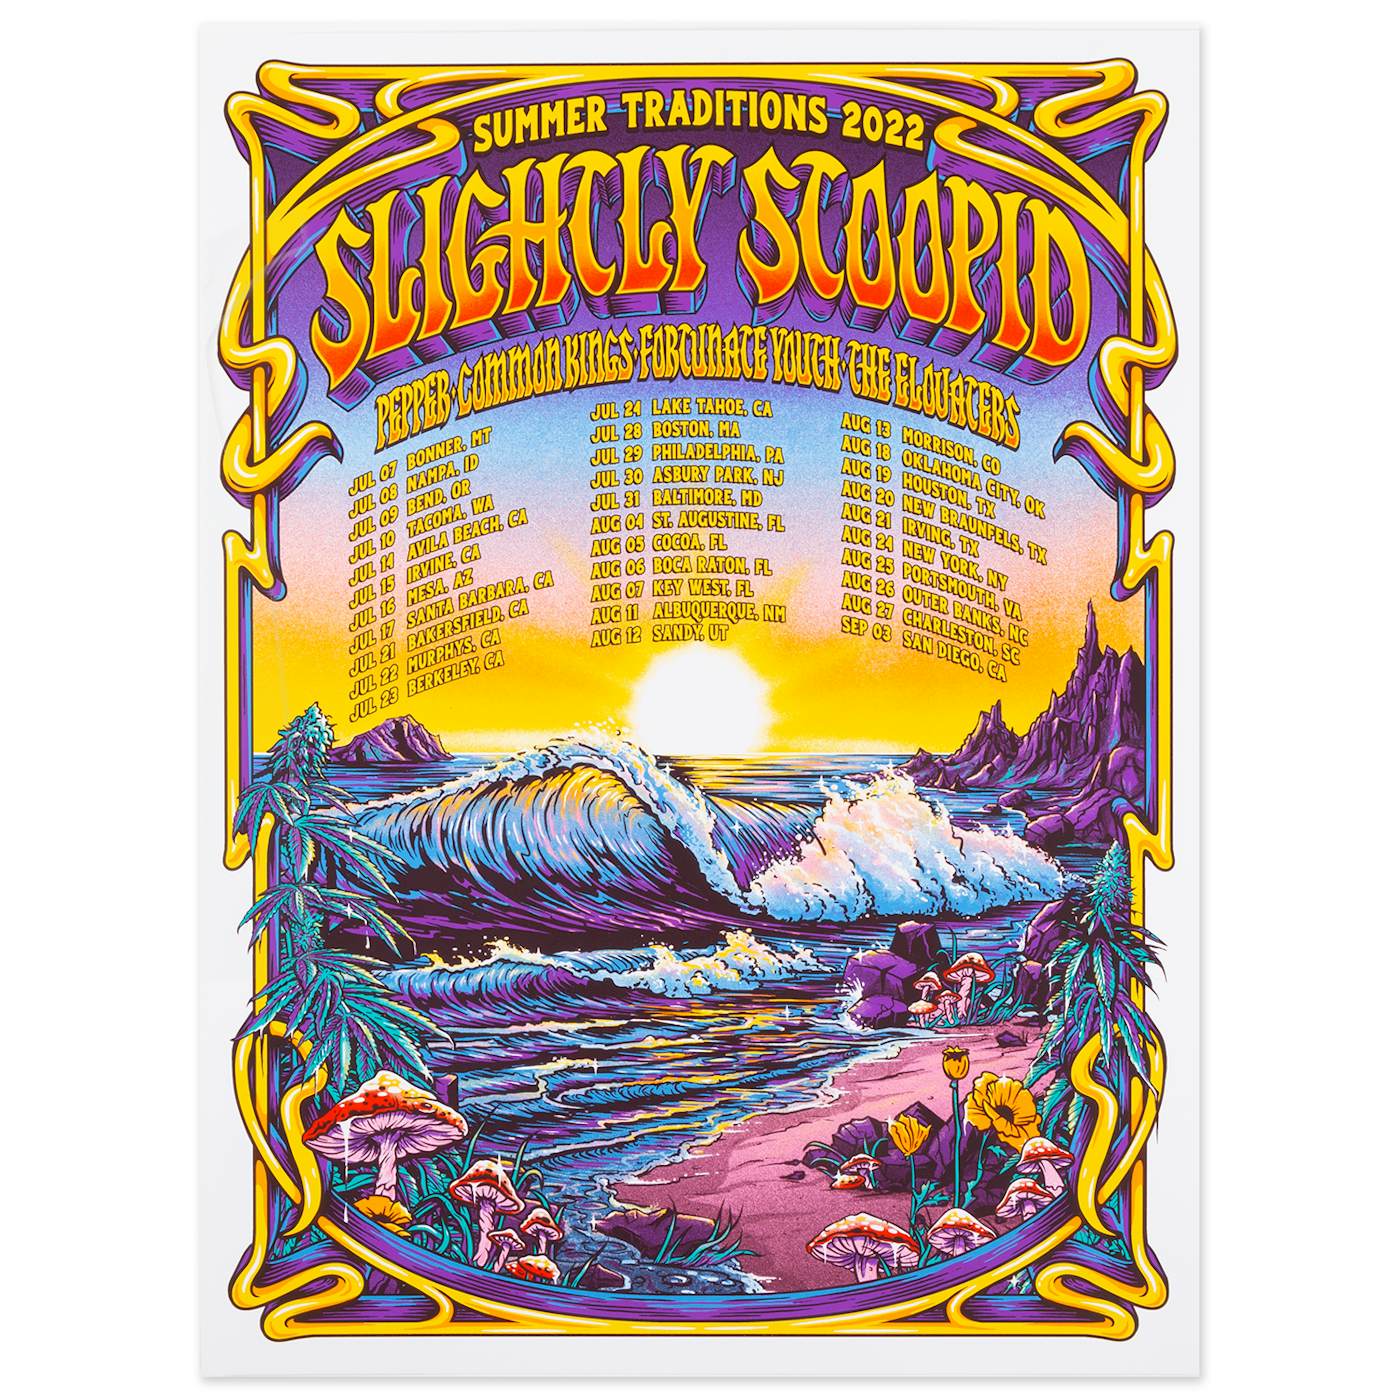 Slightly Stoopid 2022 Summer Traditions Tour Poster (With Tour Dates)